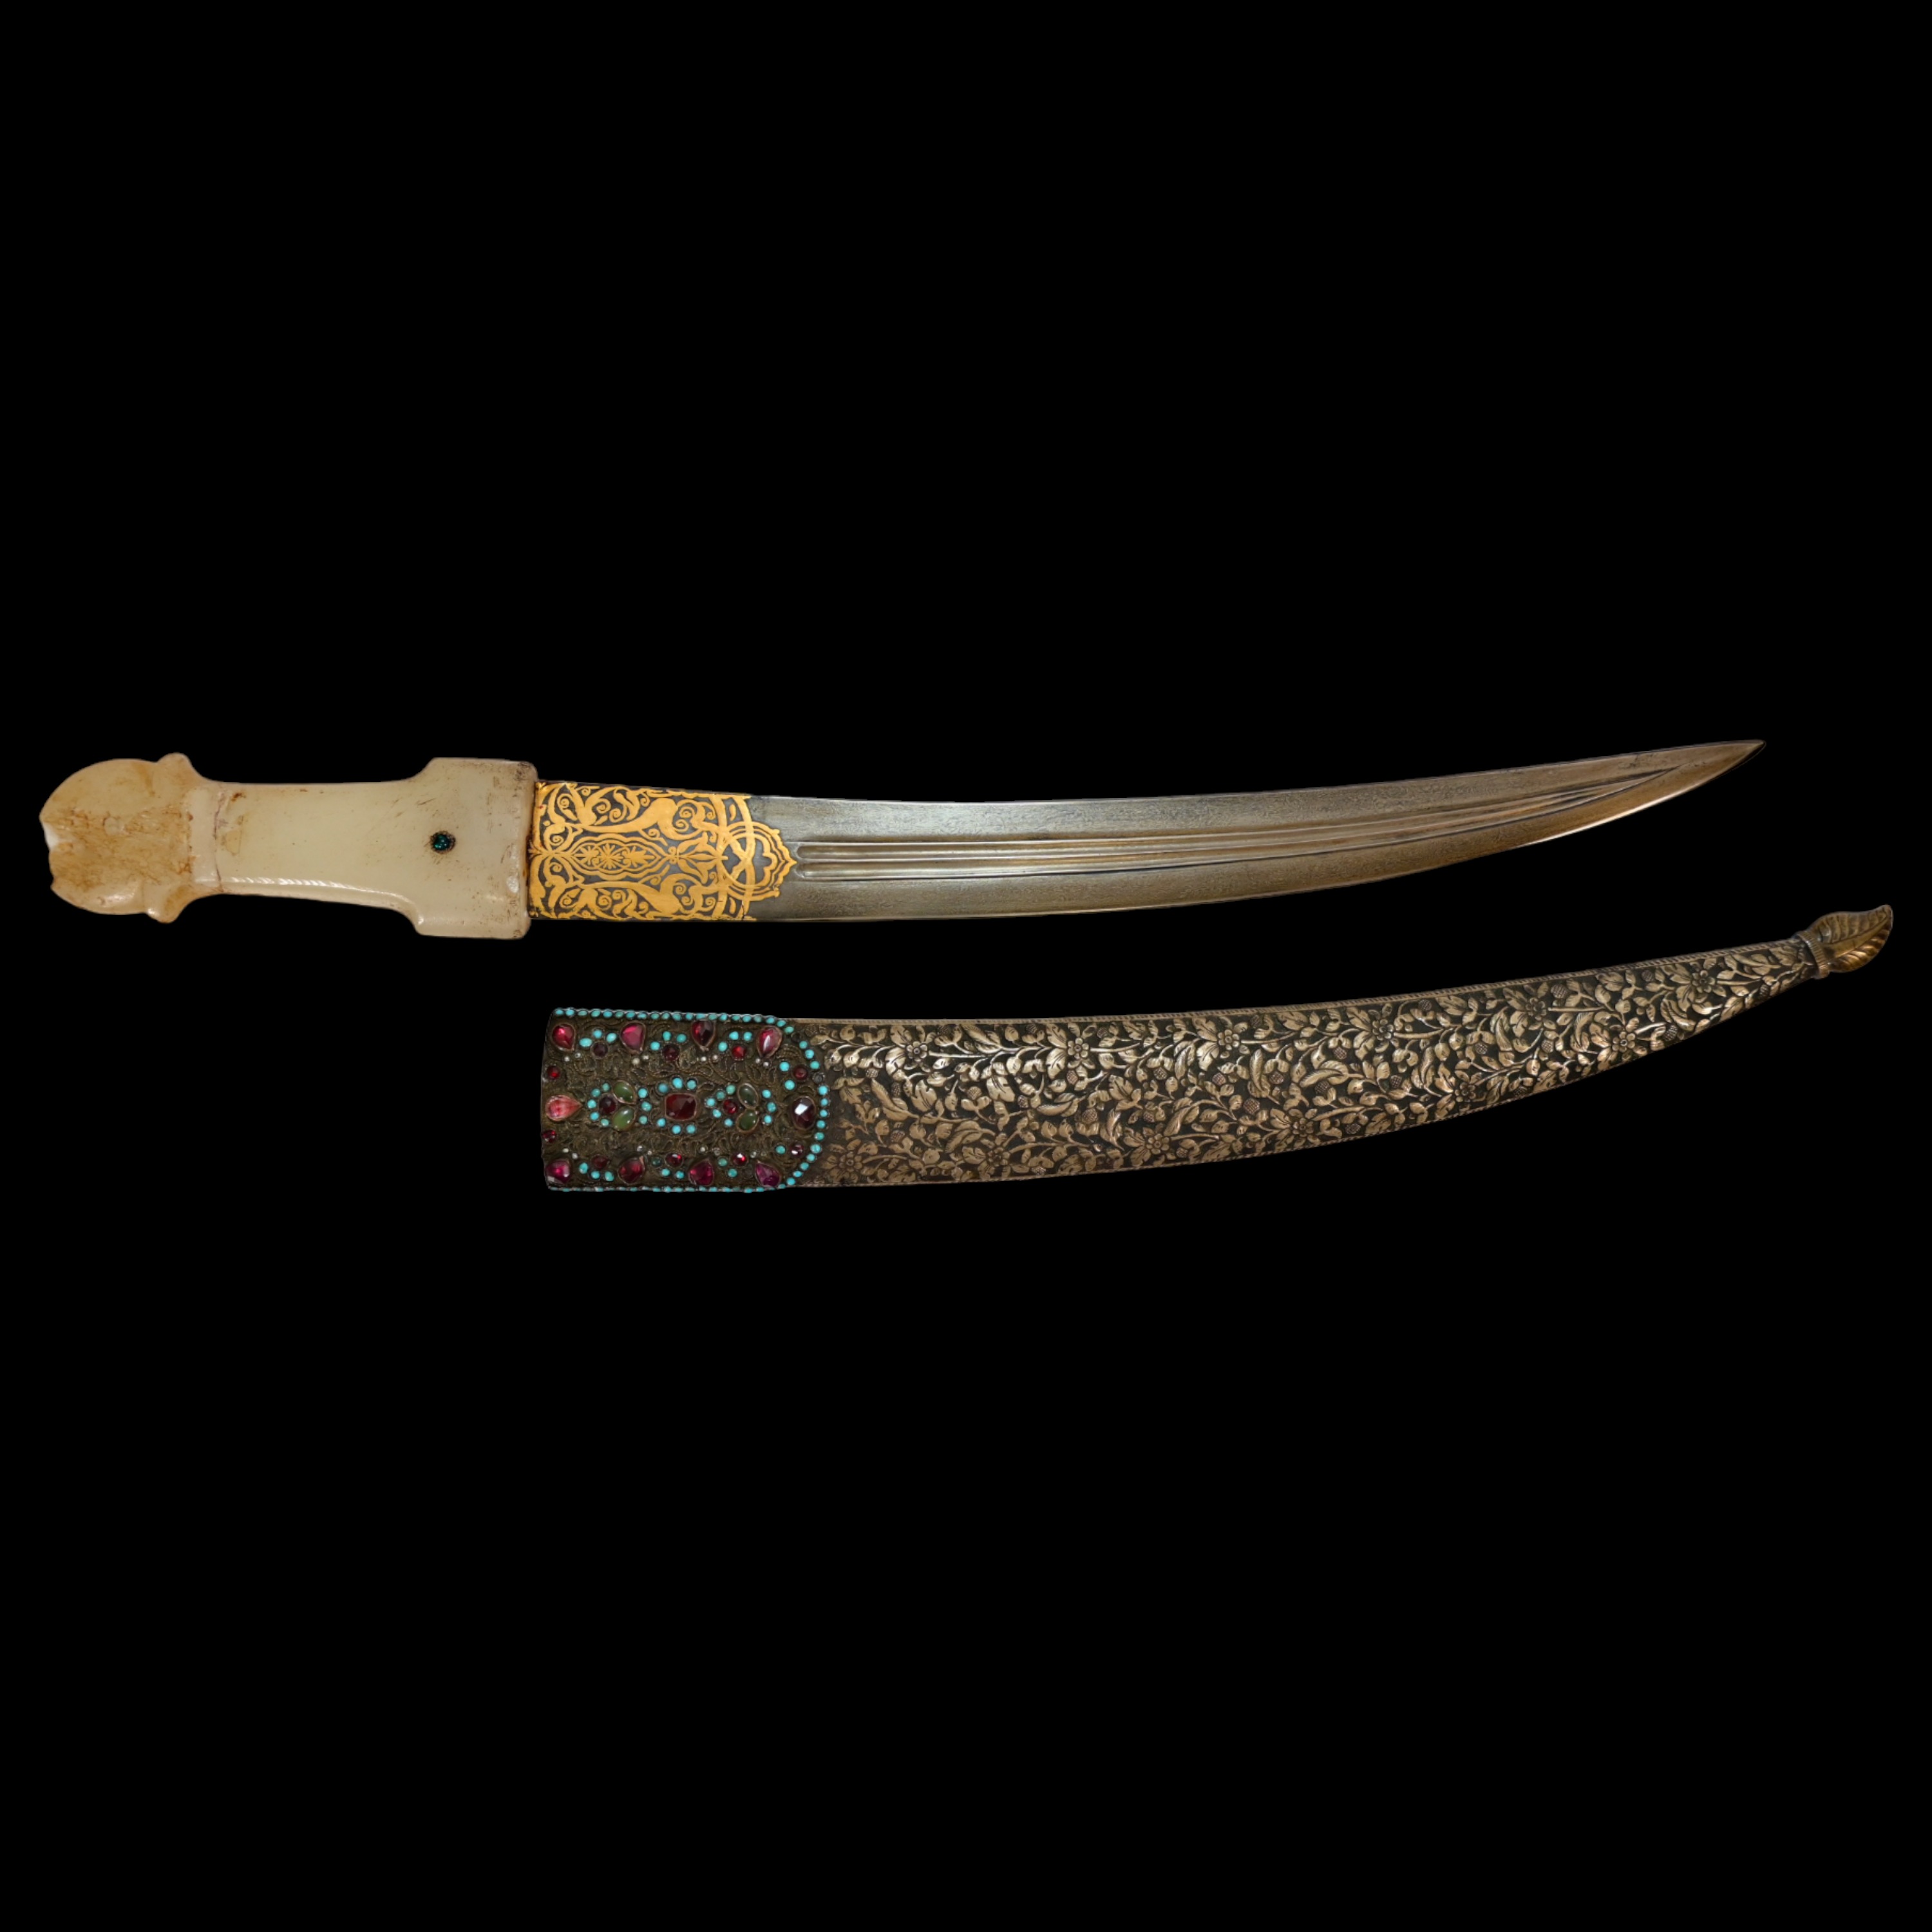 Very rare Dagger with jade handle, Wootz blade, precious stones and gold, Ottoman Empire, 18th C. - Image 11 of 19